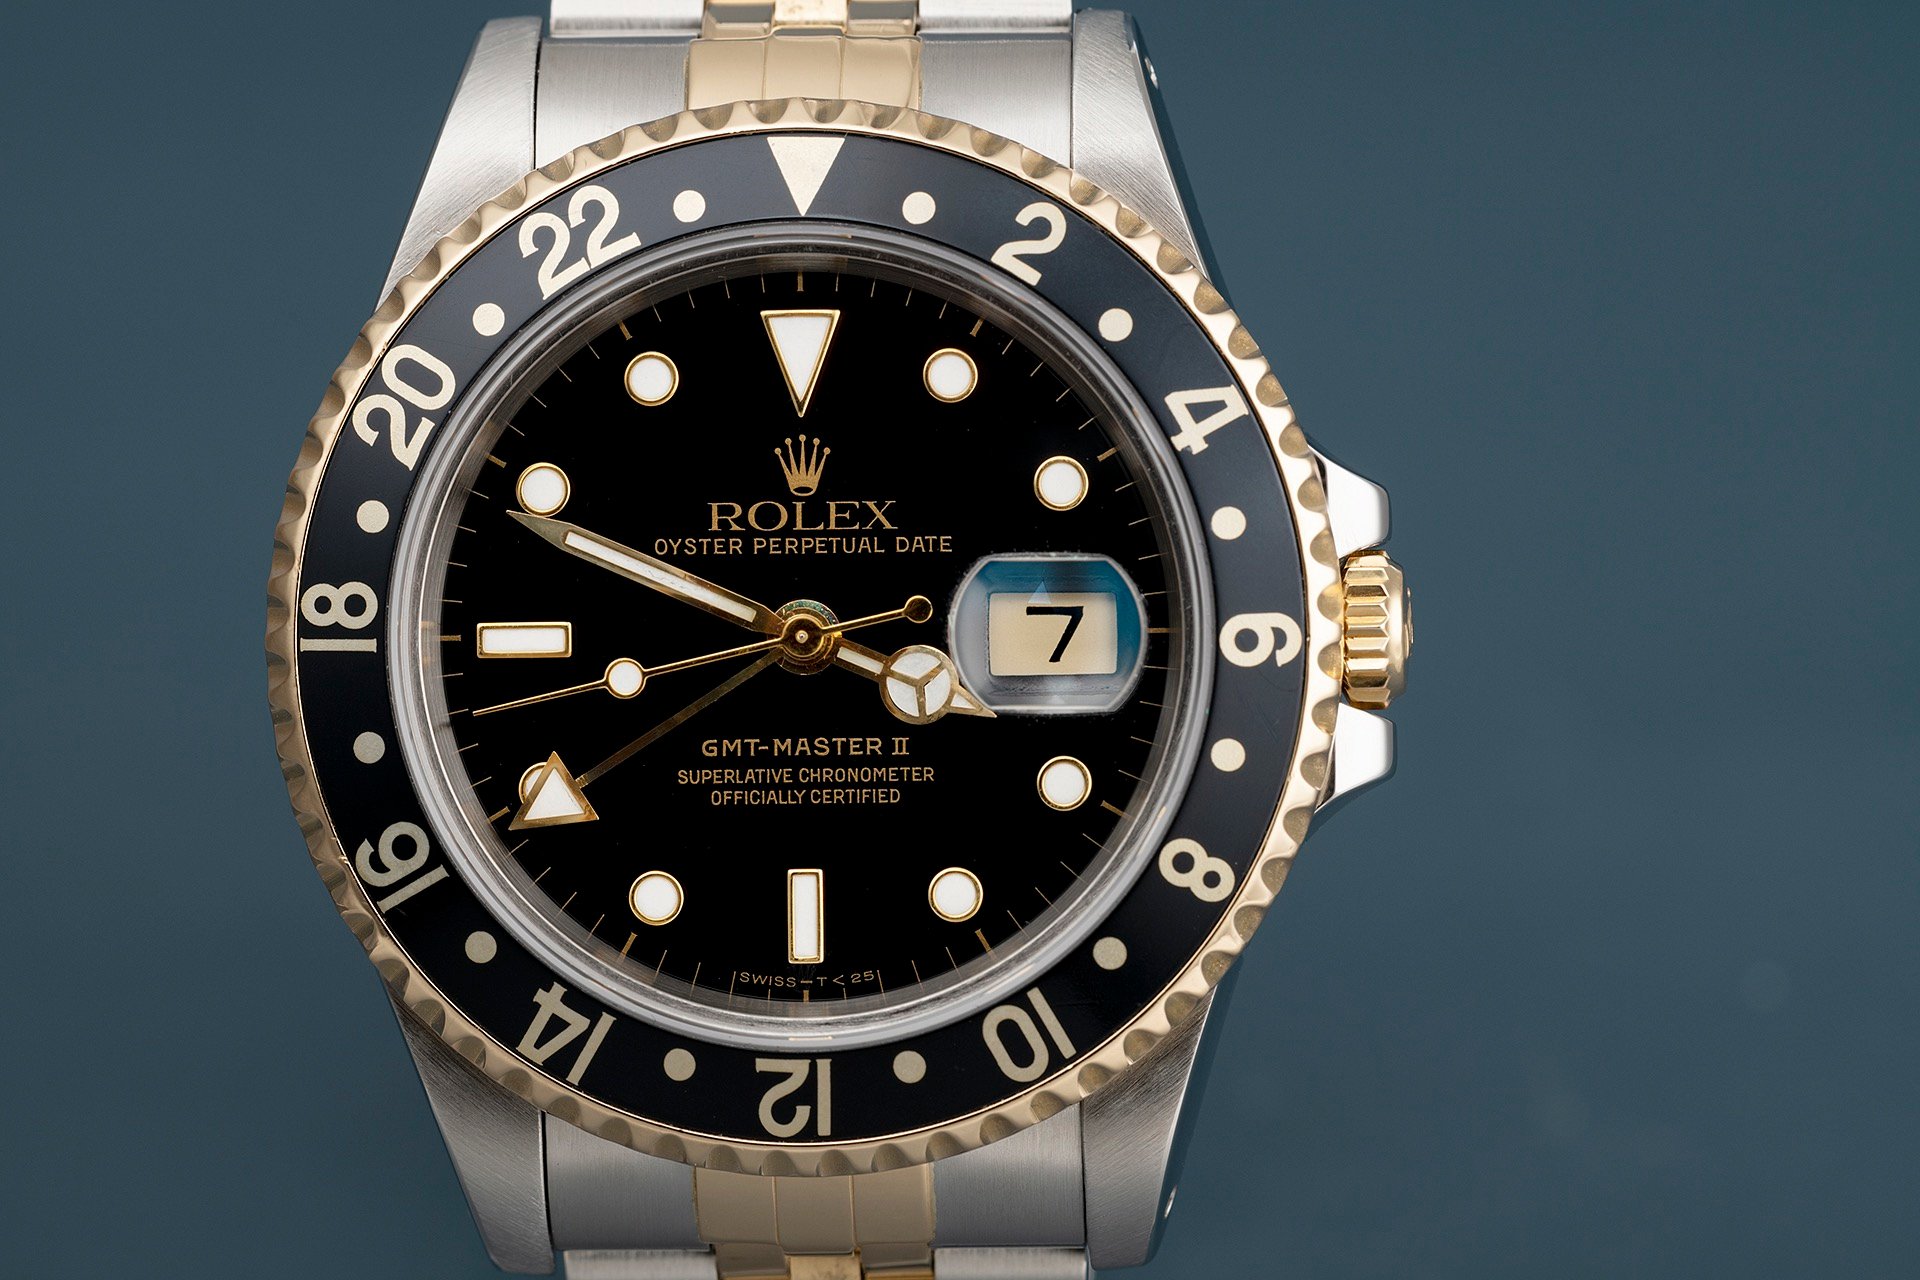 Rolex GMT-Master II ref. 16713 pre-owned sleeper watches